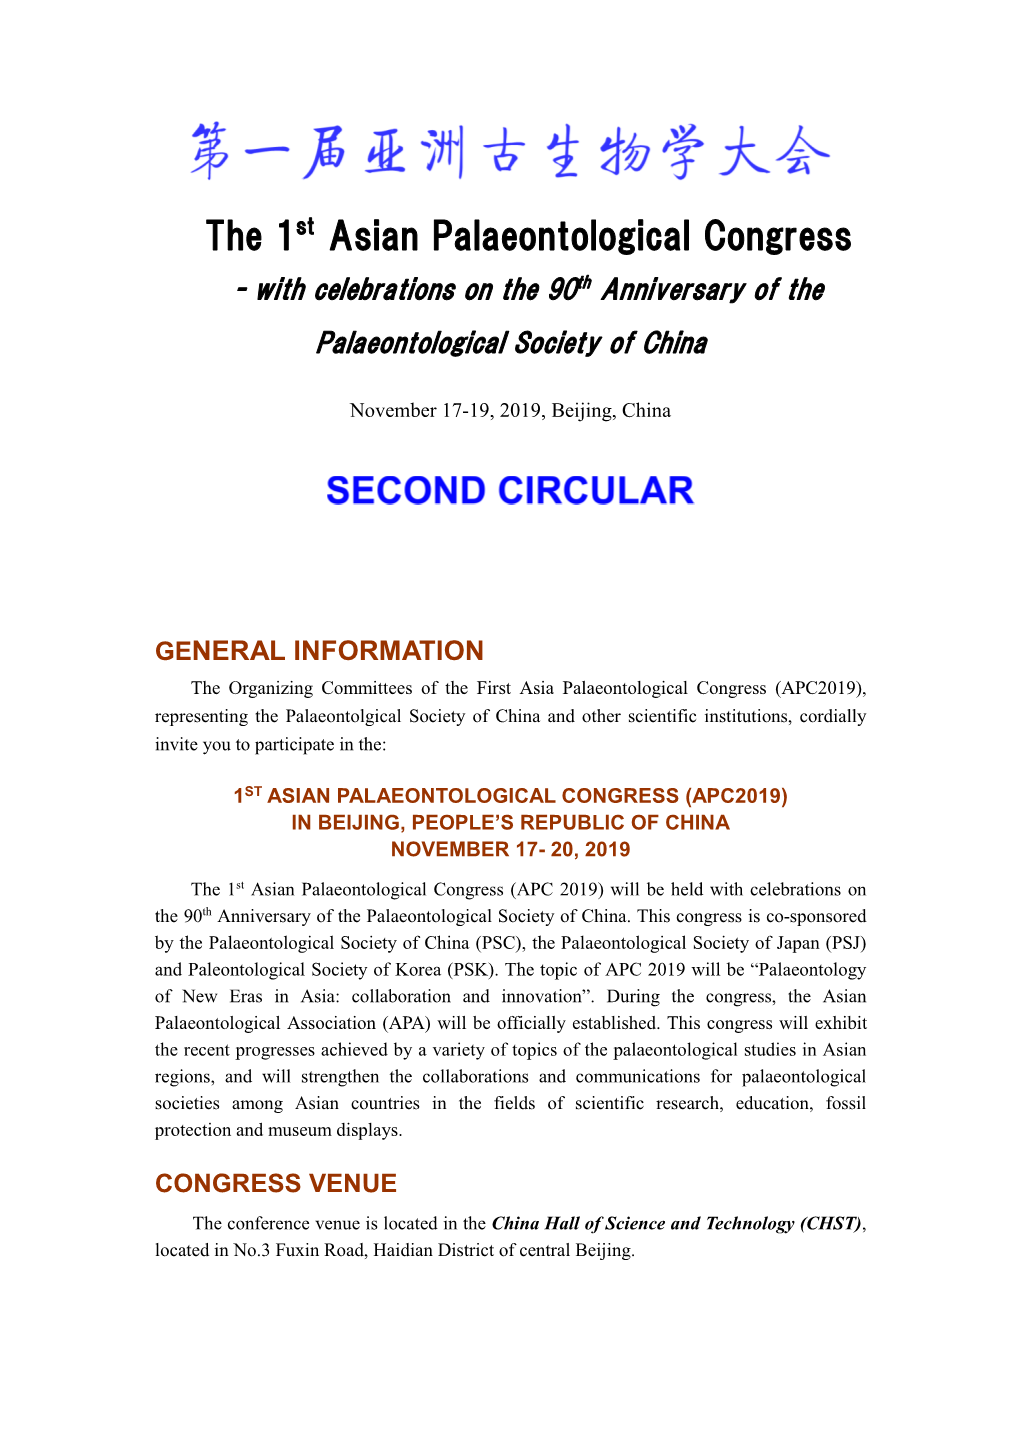 The 1St Asian Palaeontological Congress - with Celebrations on the 90Th Anniversary of the Palaeontological Society of China